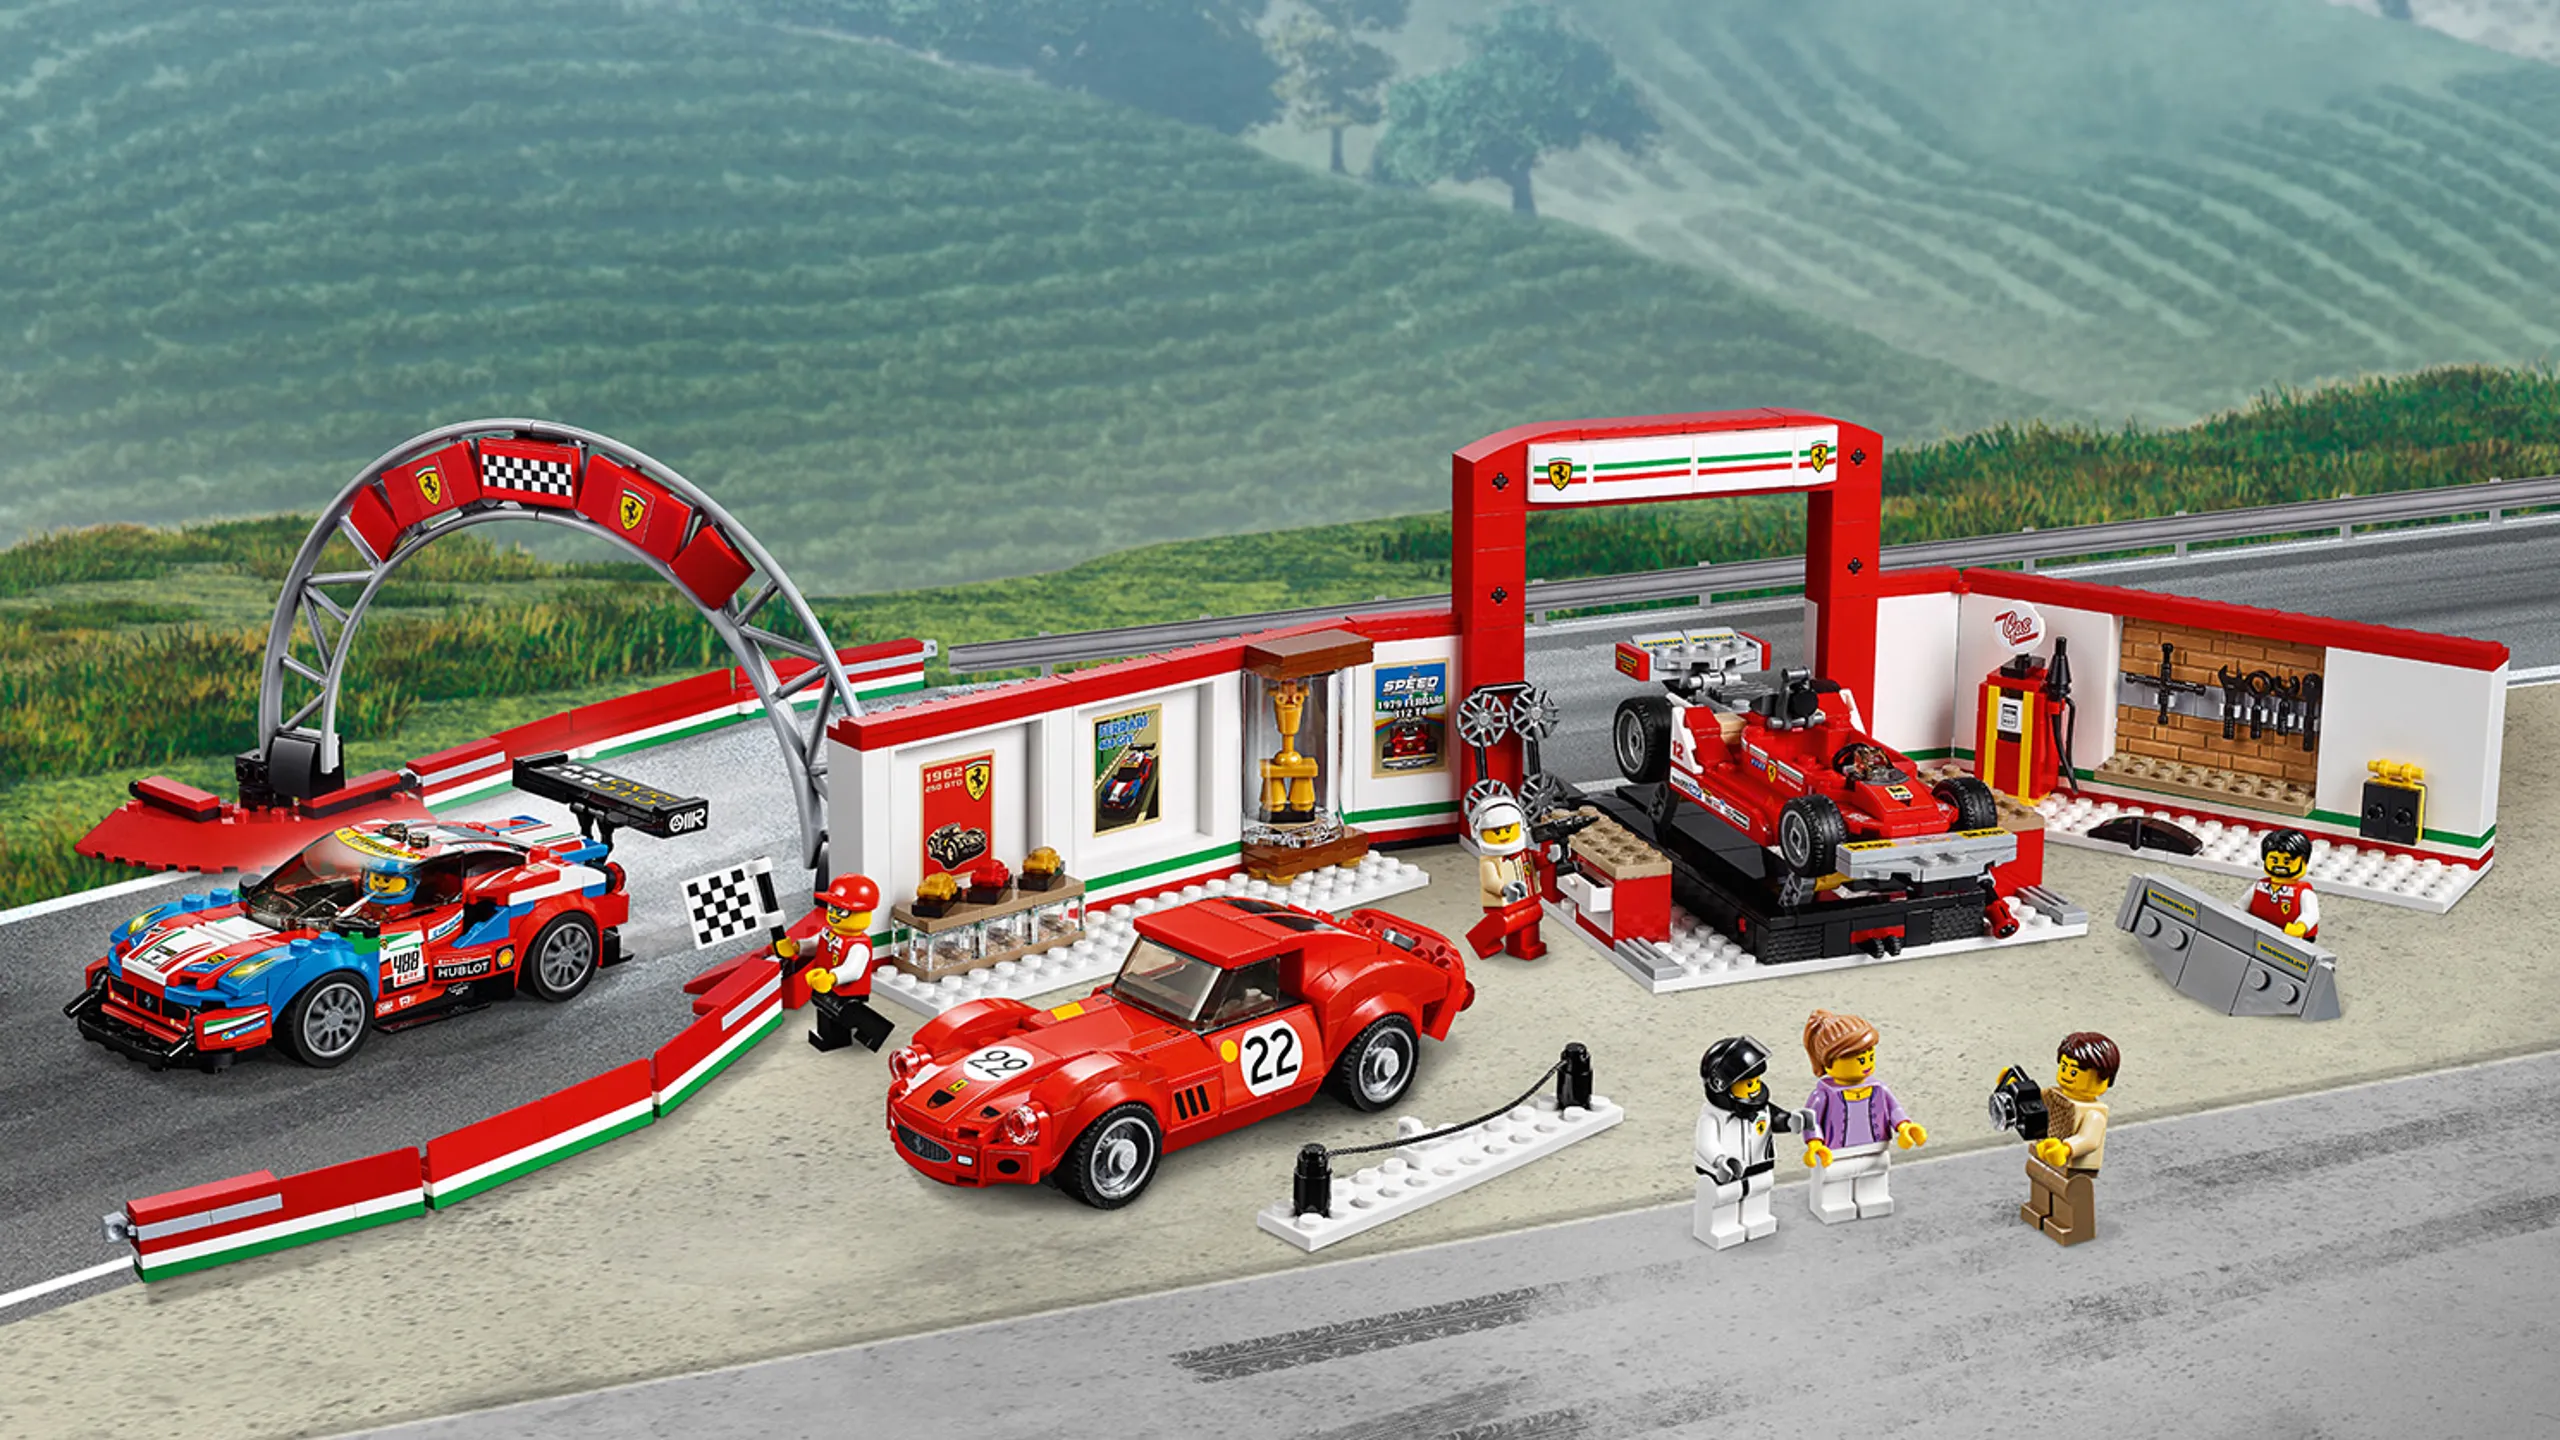 LEGO Speed Champions - 75889 Ferrari Ultimate Garage - Build cool LEGO brick versions of classic Farrari cars and get them race ready in the workshop with the tools.